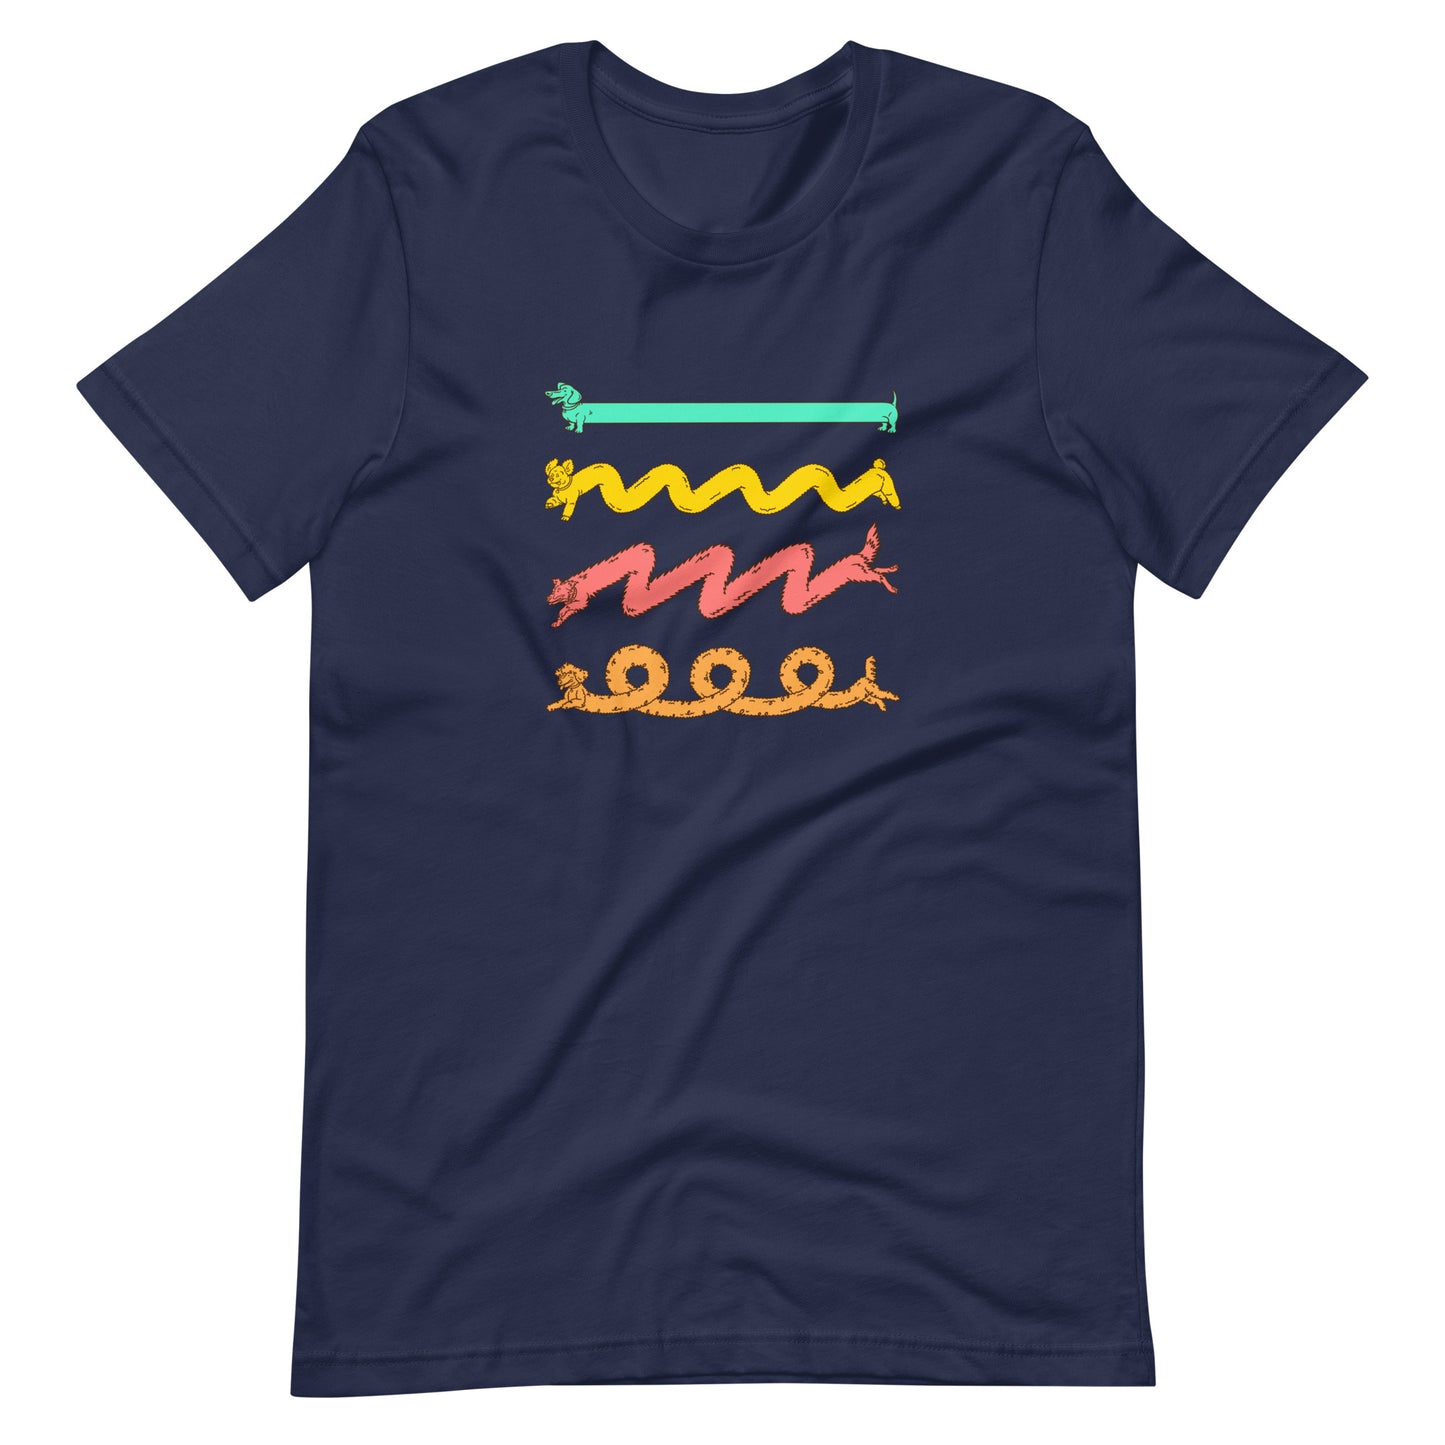 Scribble Dogs t-shirt